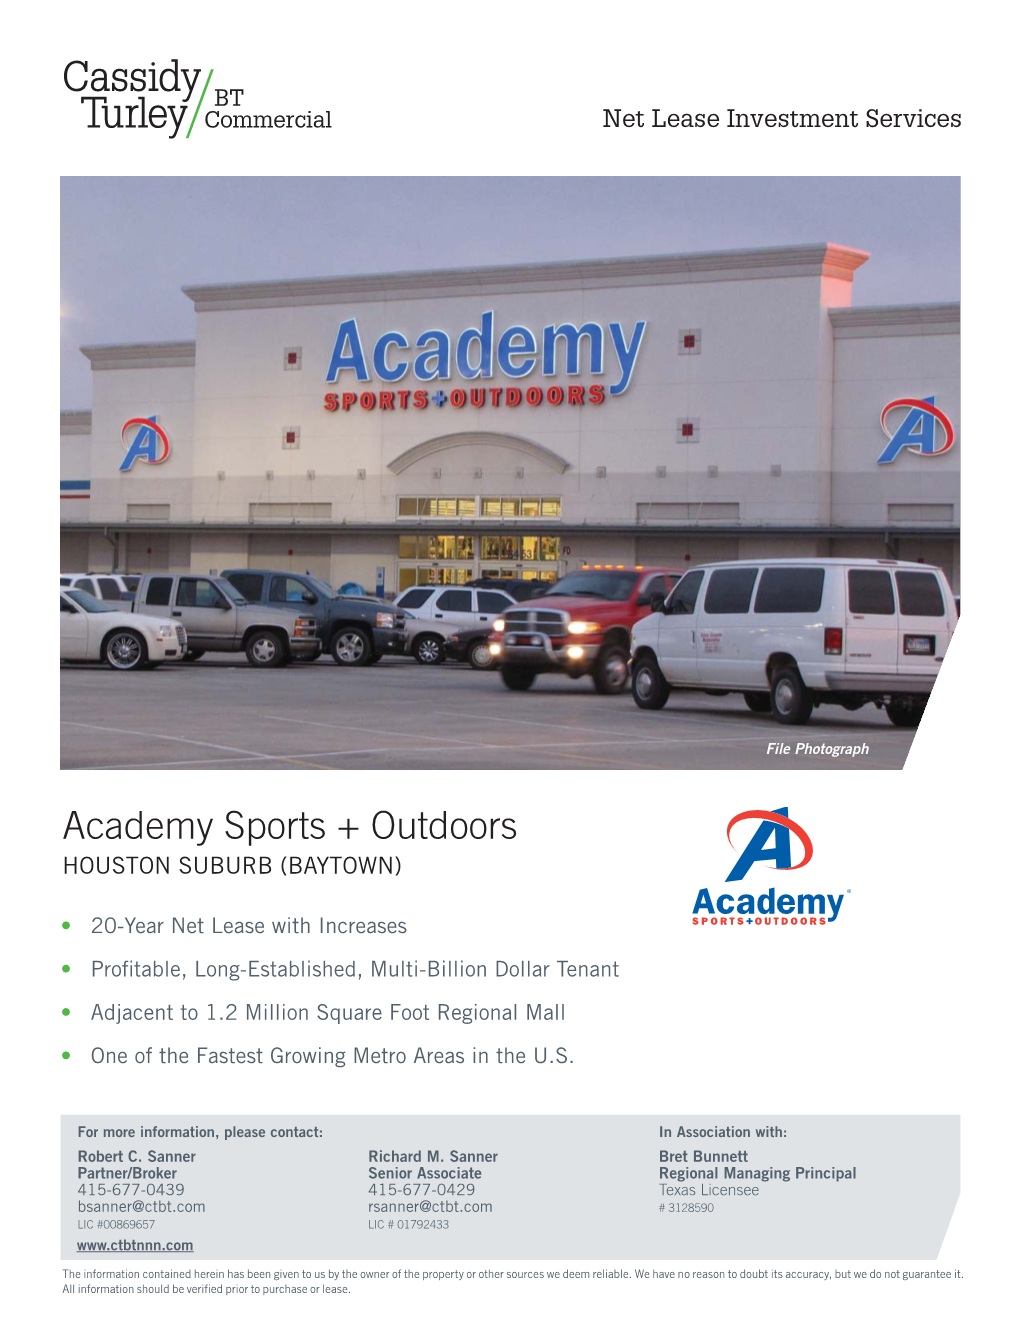 Academy Sports Baytown TX-Exclusive.Indd